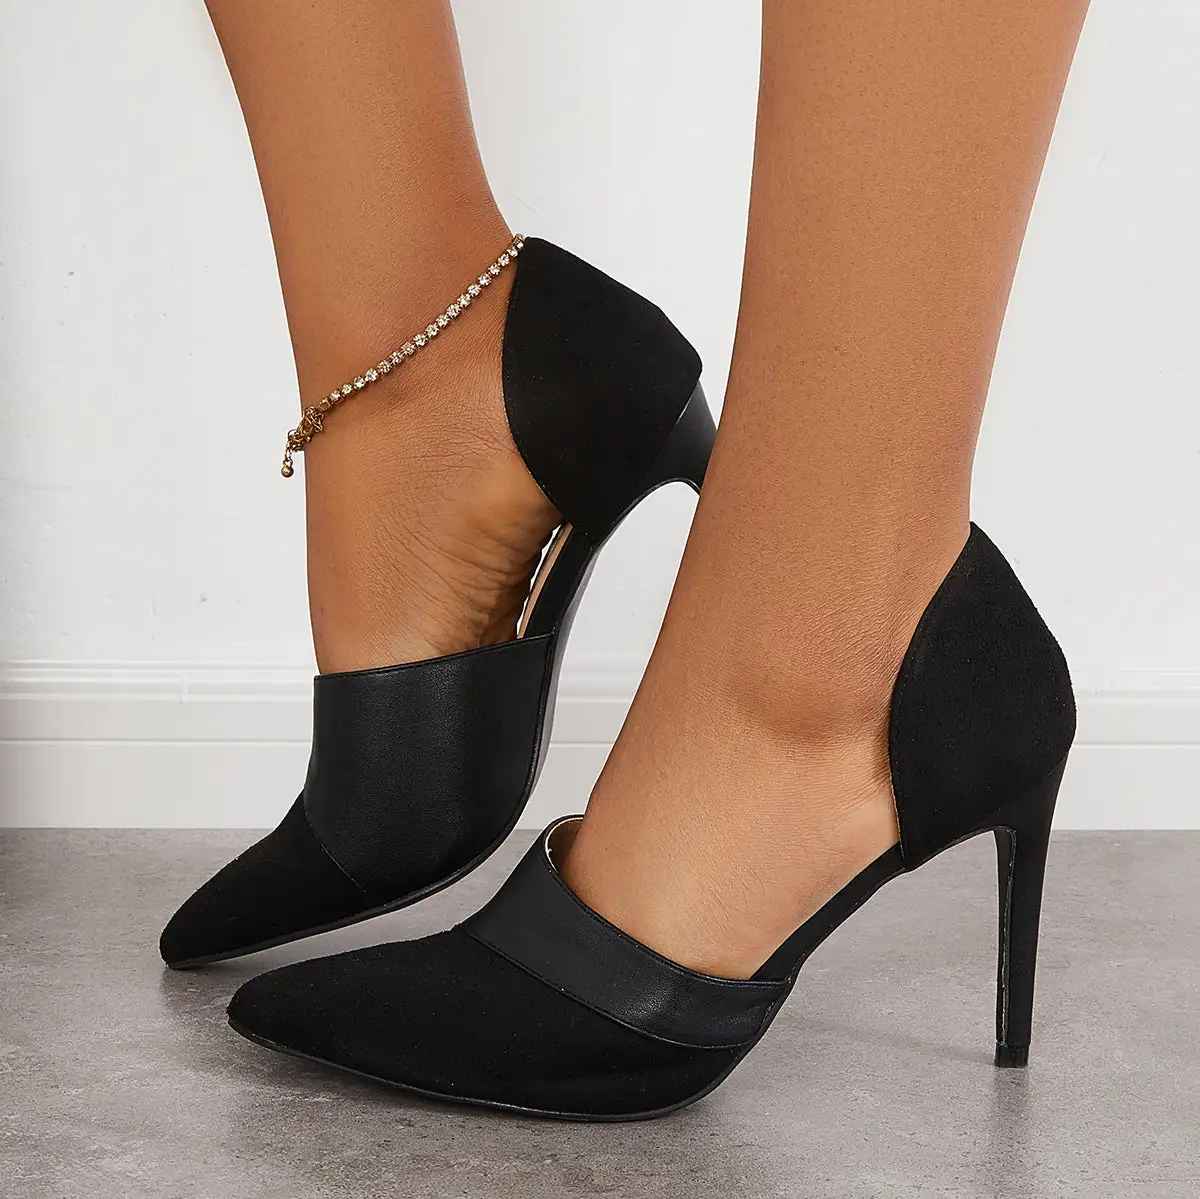 Side Cutout Stiletto High Heels Pointed Toe Dress Pumps